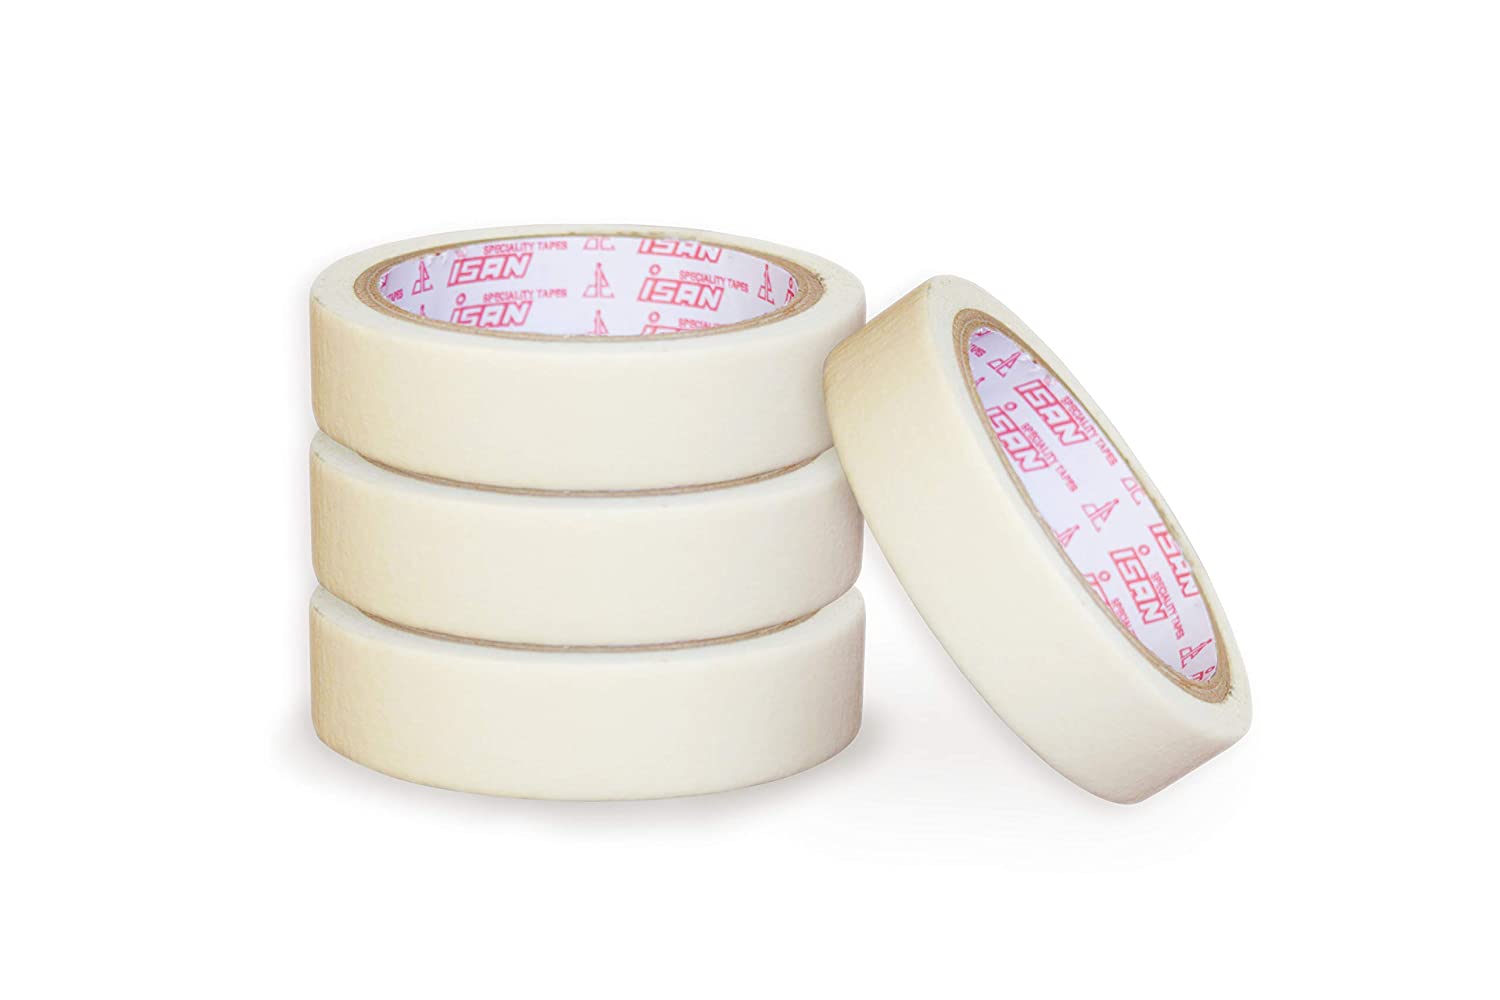 WILLS Masking Tape 1 inch (Pack of 2) of Multi-Use, Easy Tear Tape.